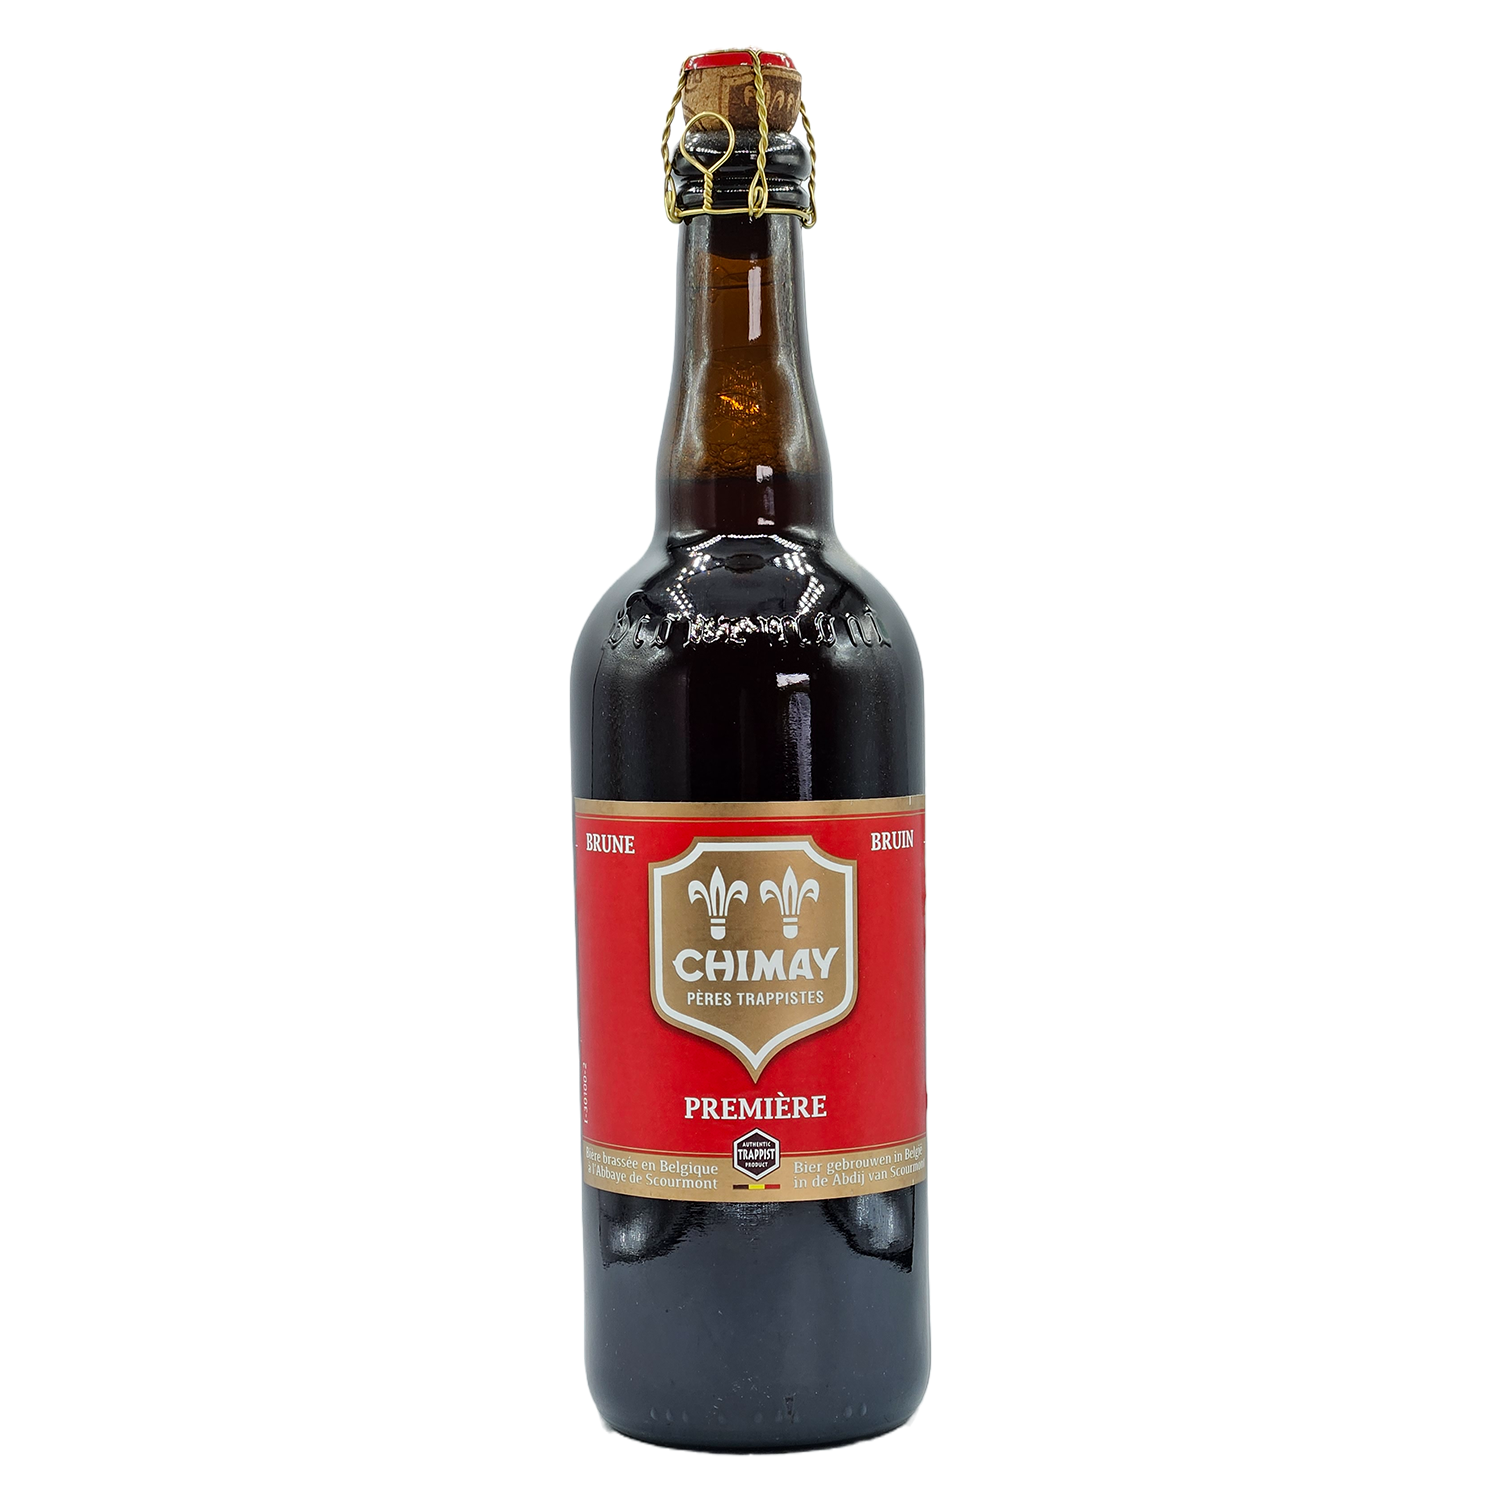 Chimay Première (Red) Dubbel LARGE 750ml